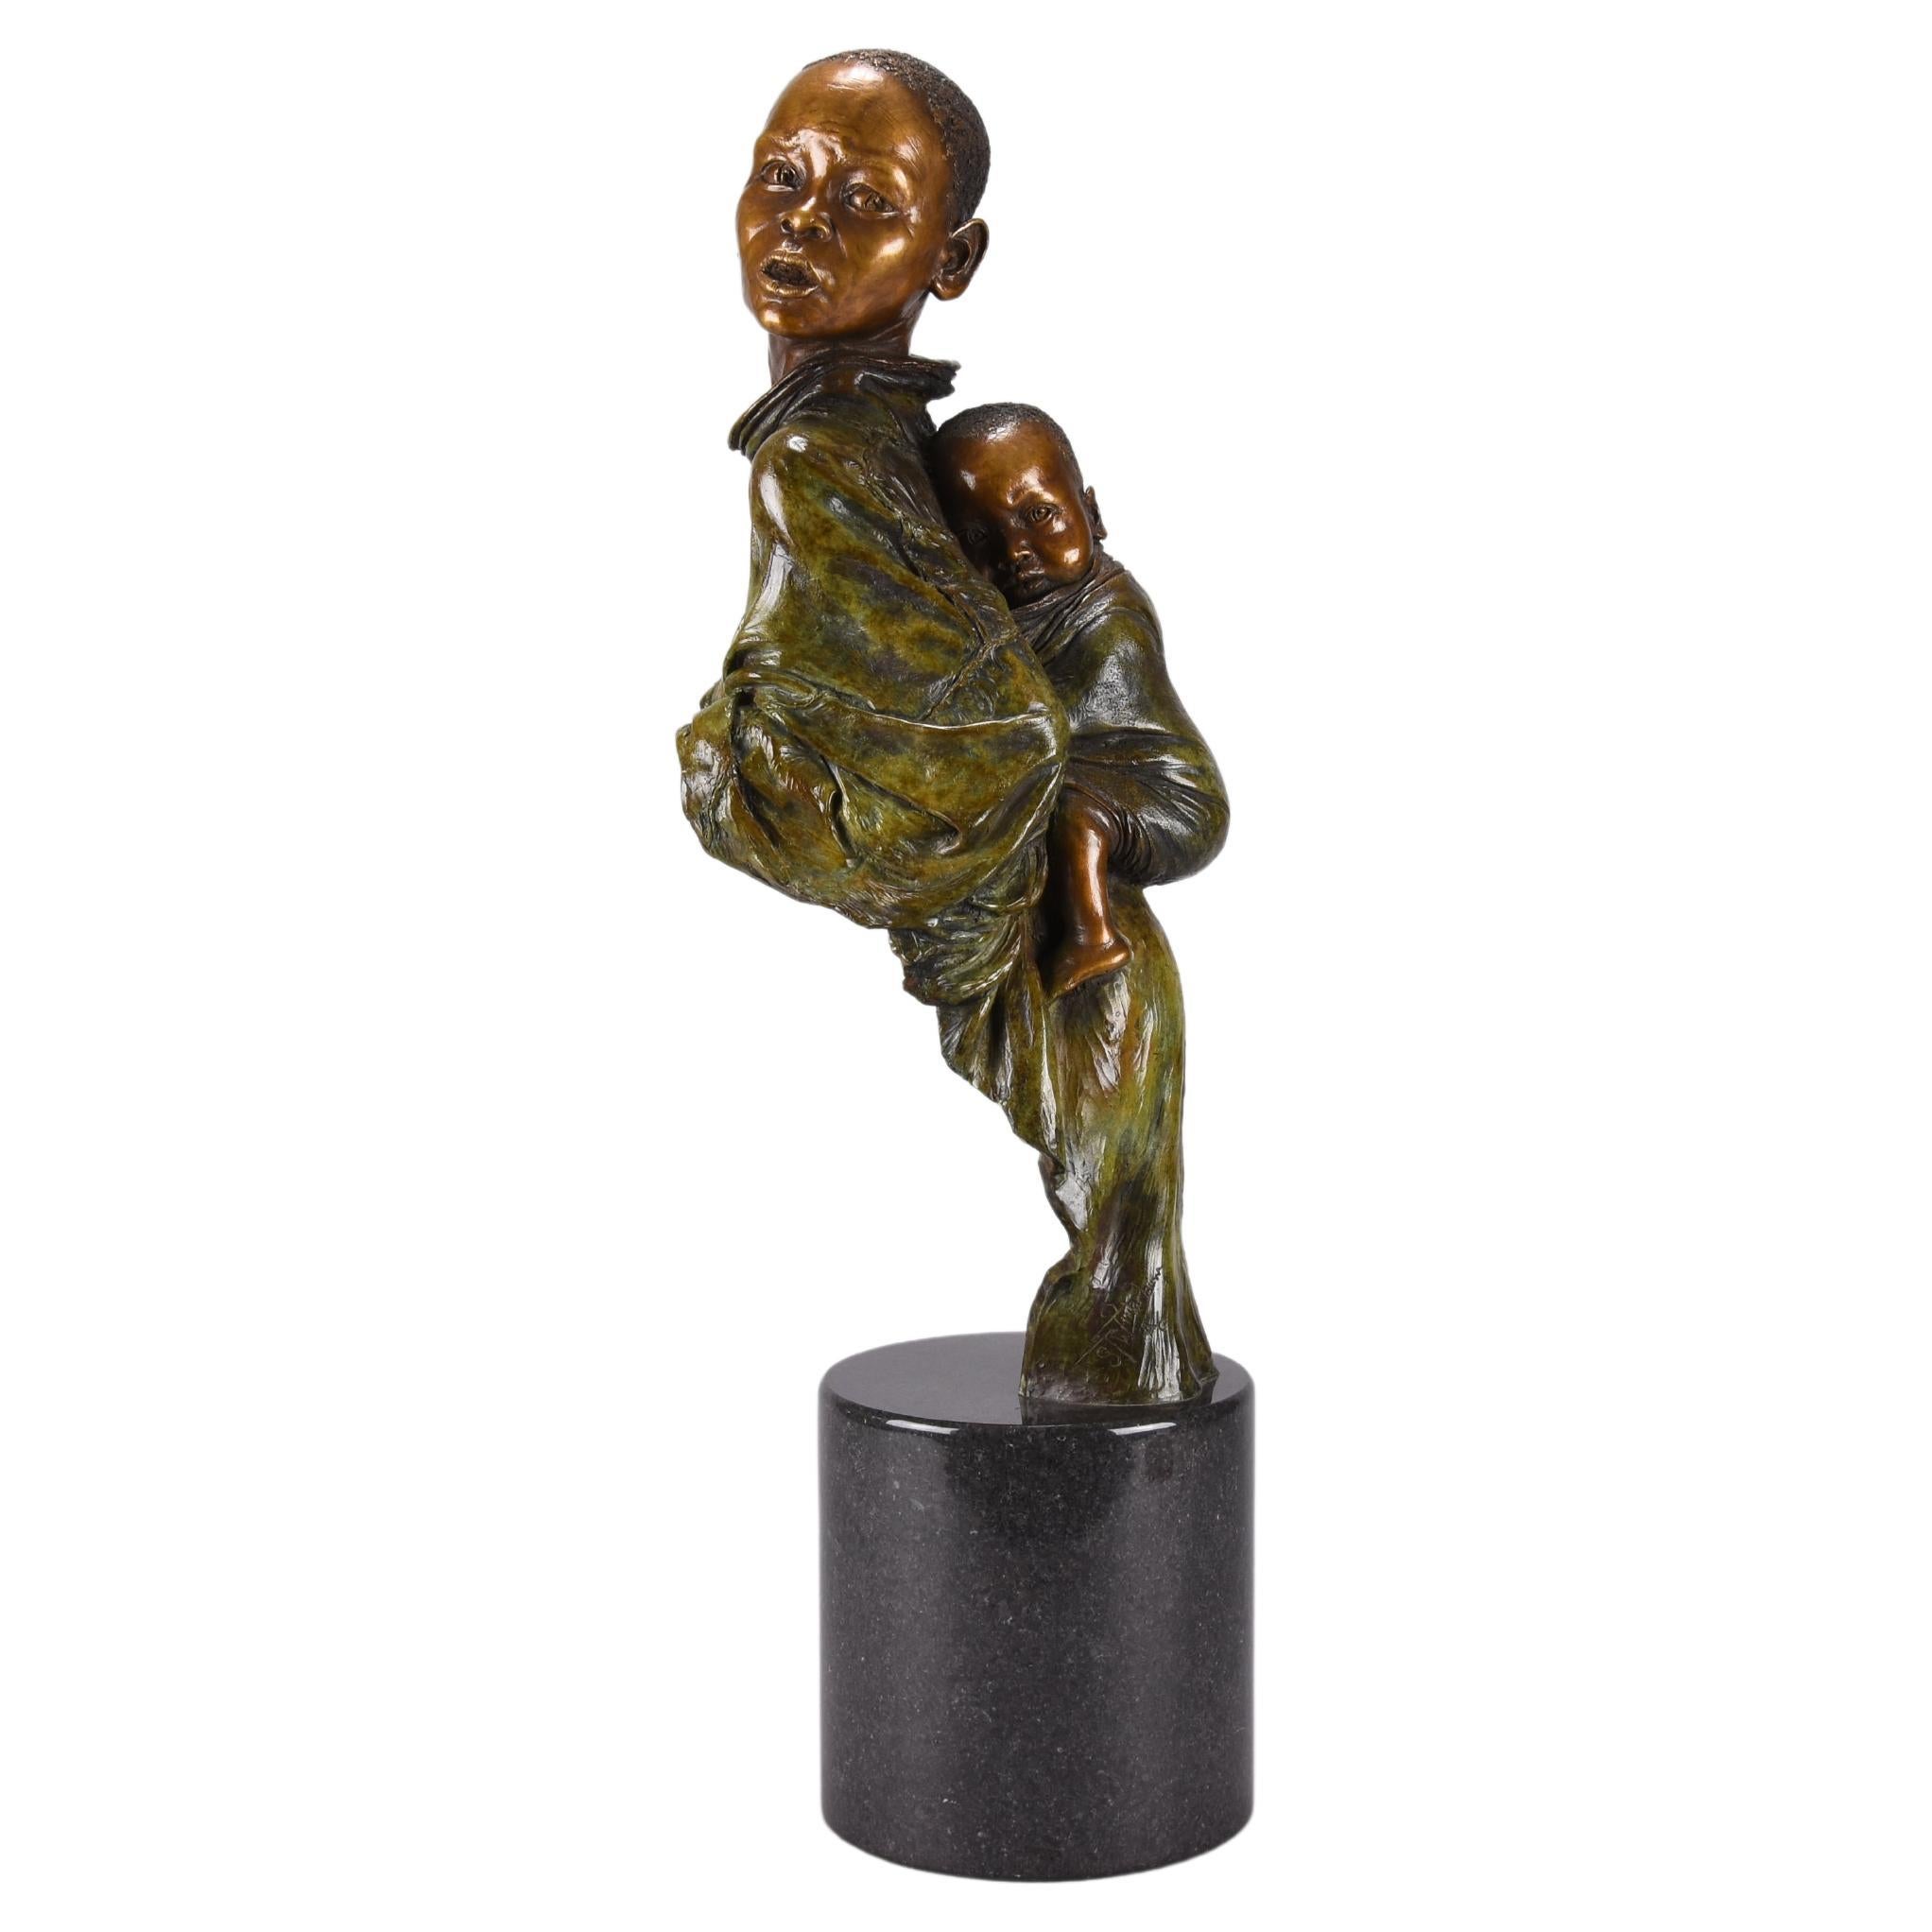 21st C Bronze Entitled "He Ain't Heavy, He's My Brother" by Steve Winterburn For Sale